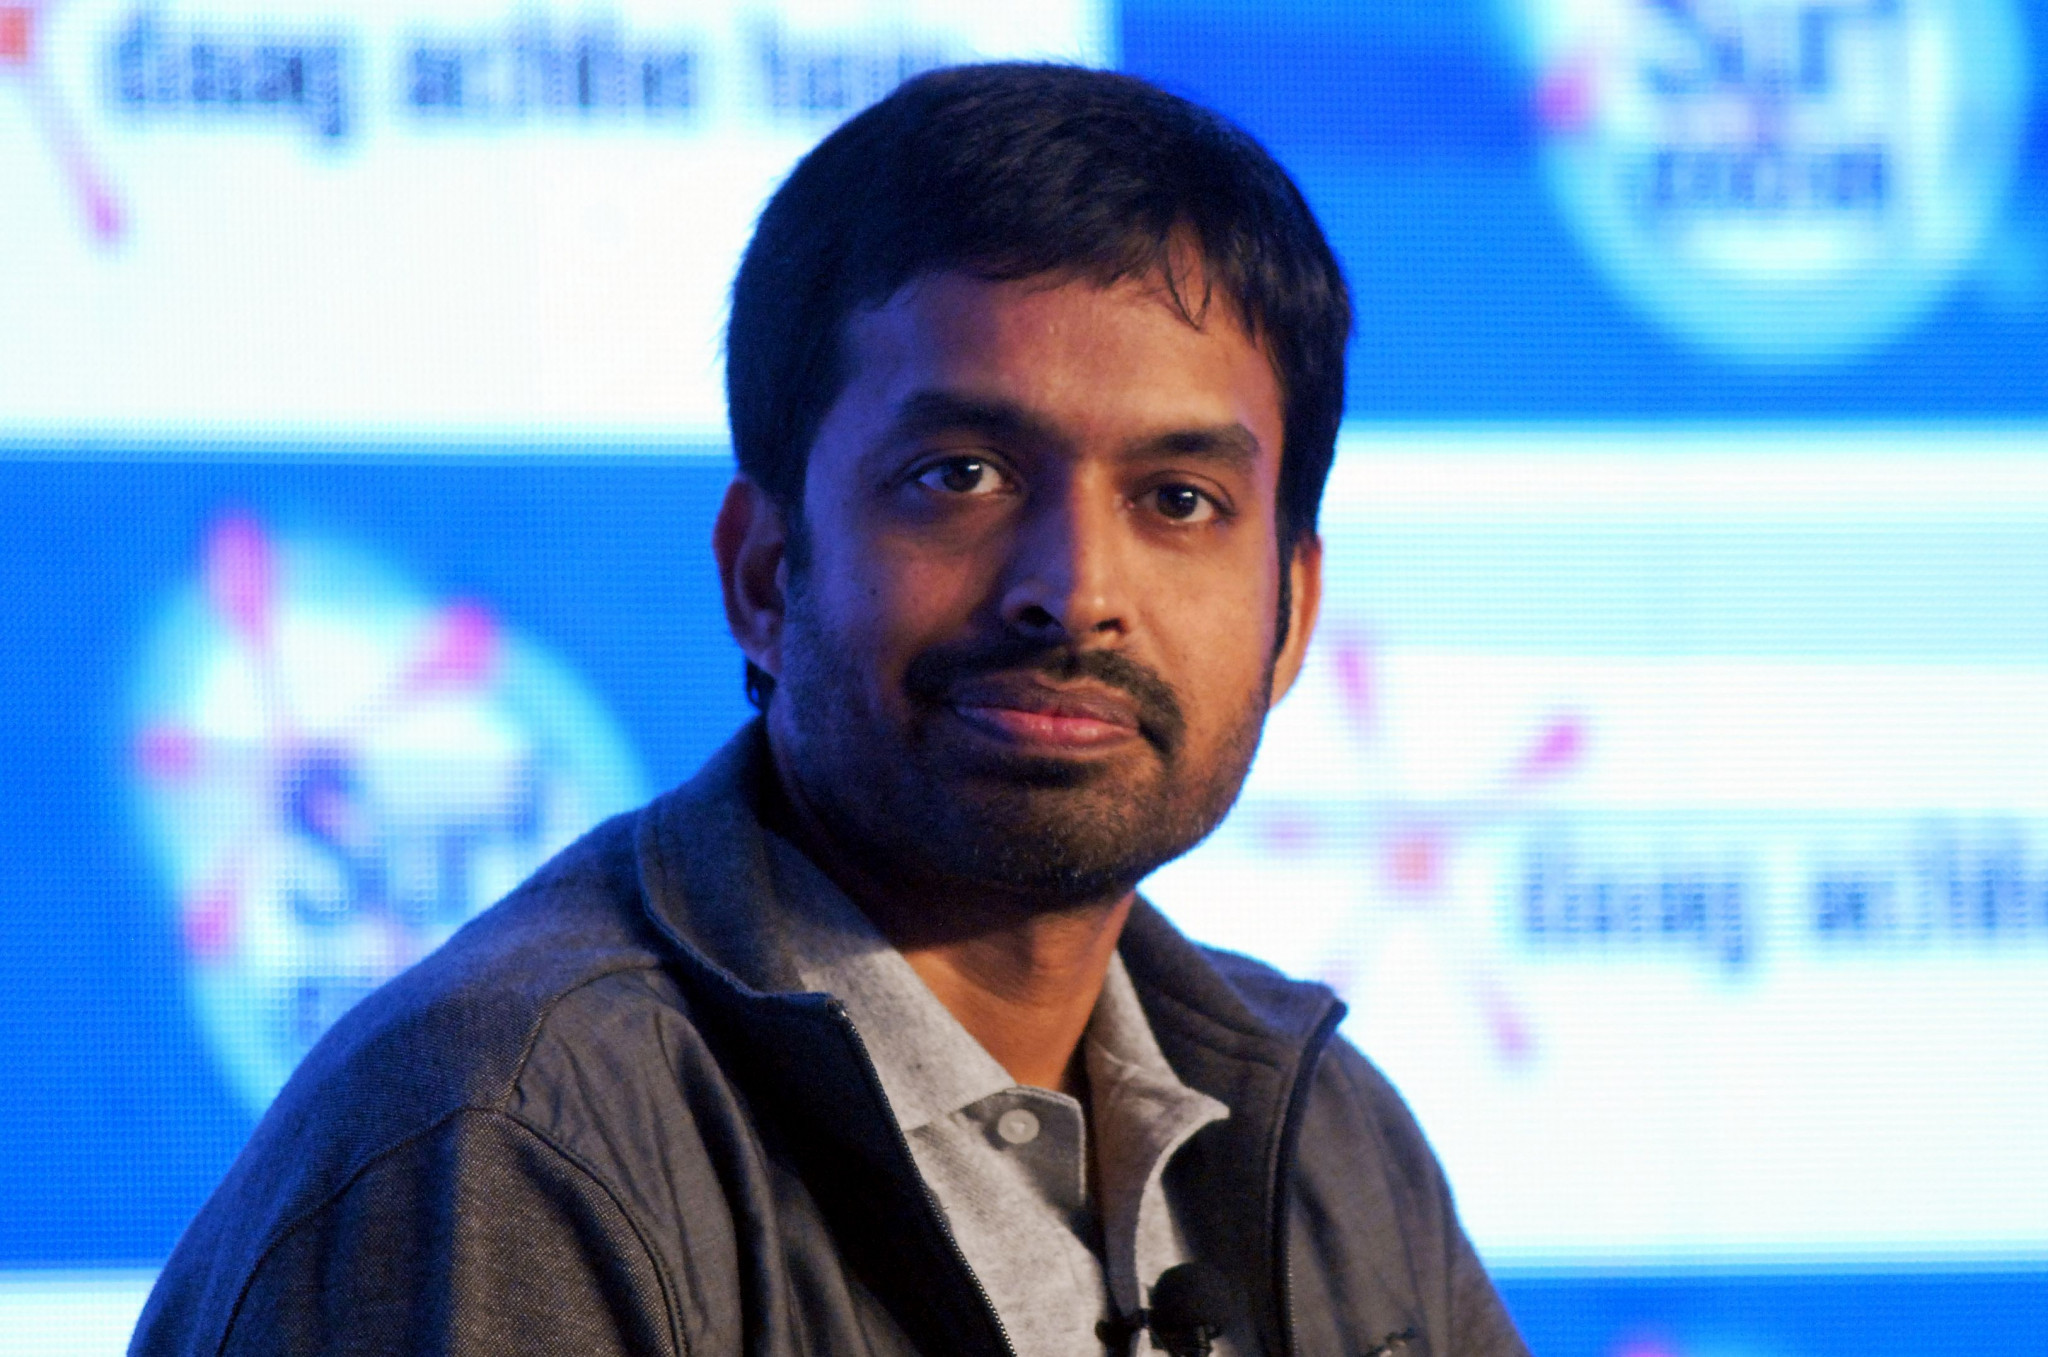 Indian coach Pullela Gopichand has claimed qualification for the badminton events at next year's Olympic Games in Tokyo is "unfair" on the players ©Getty Images